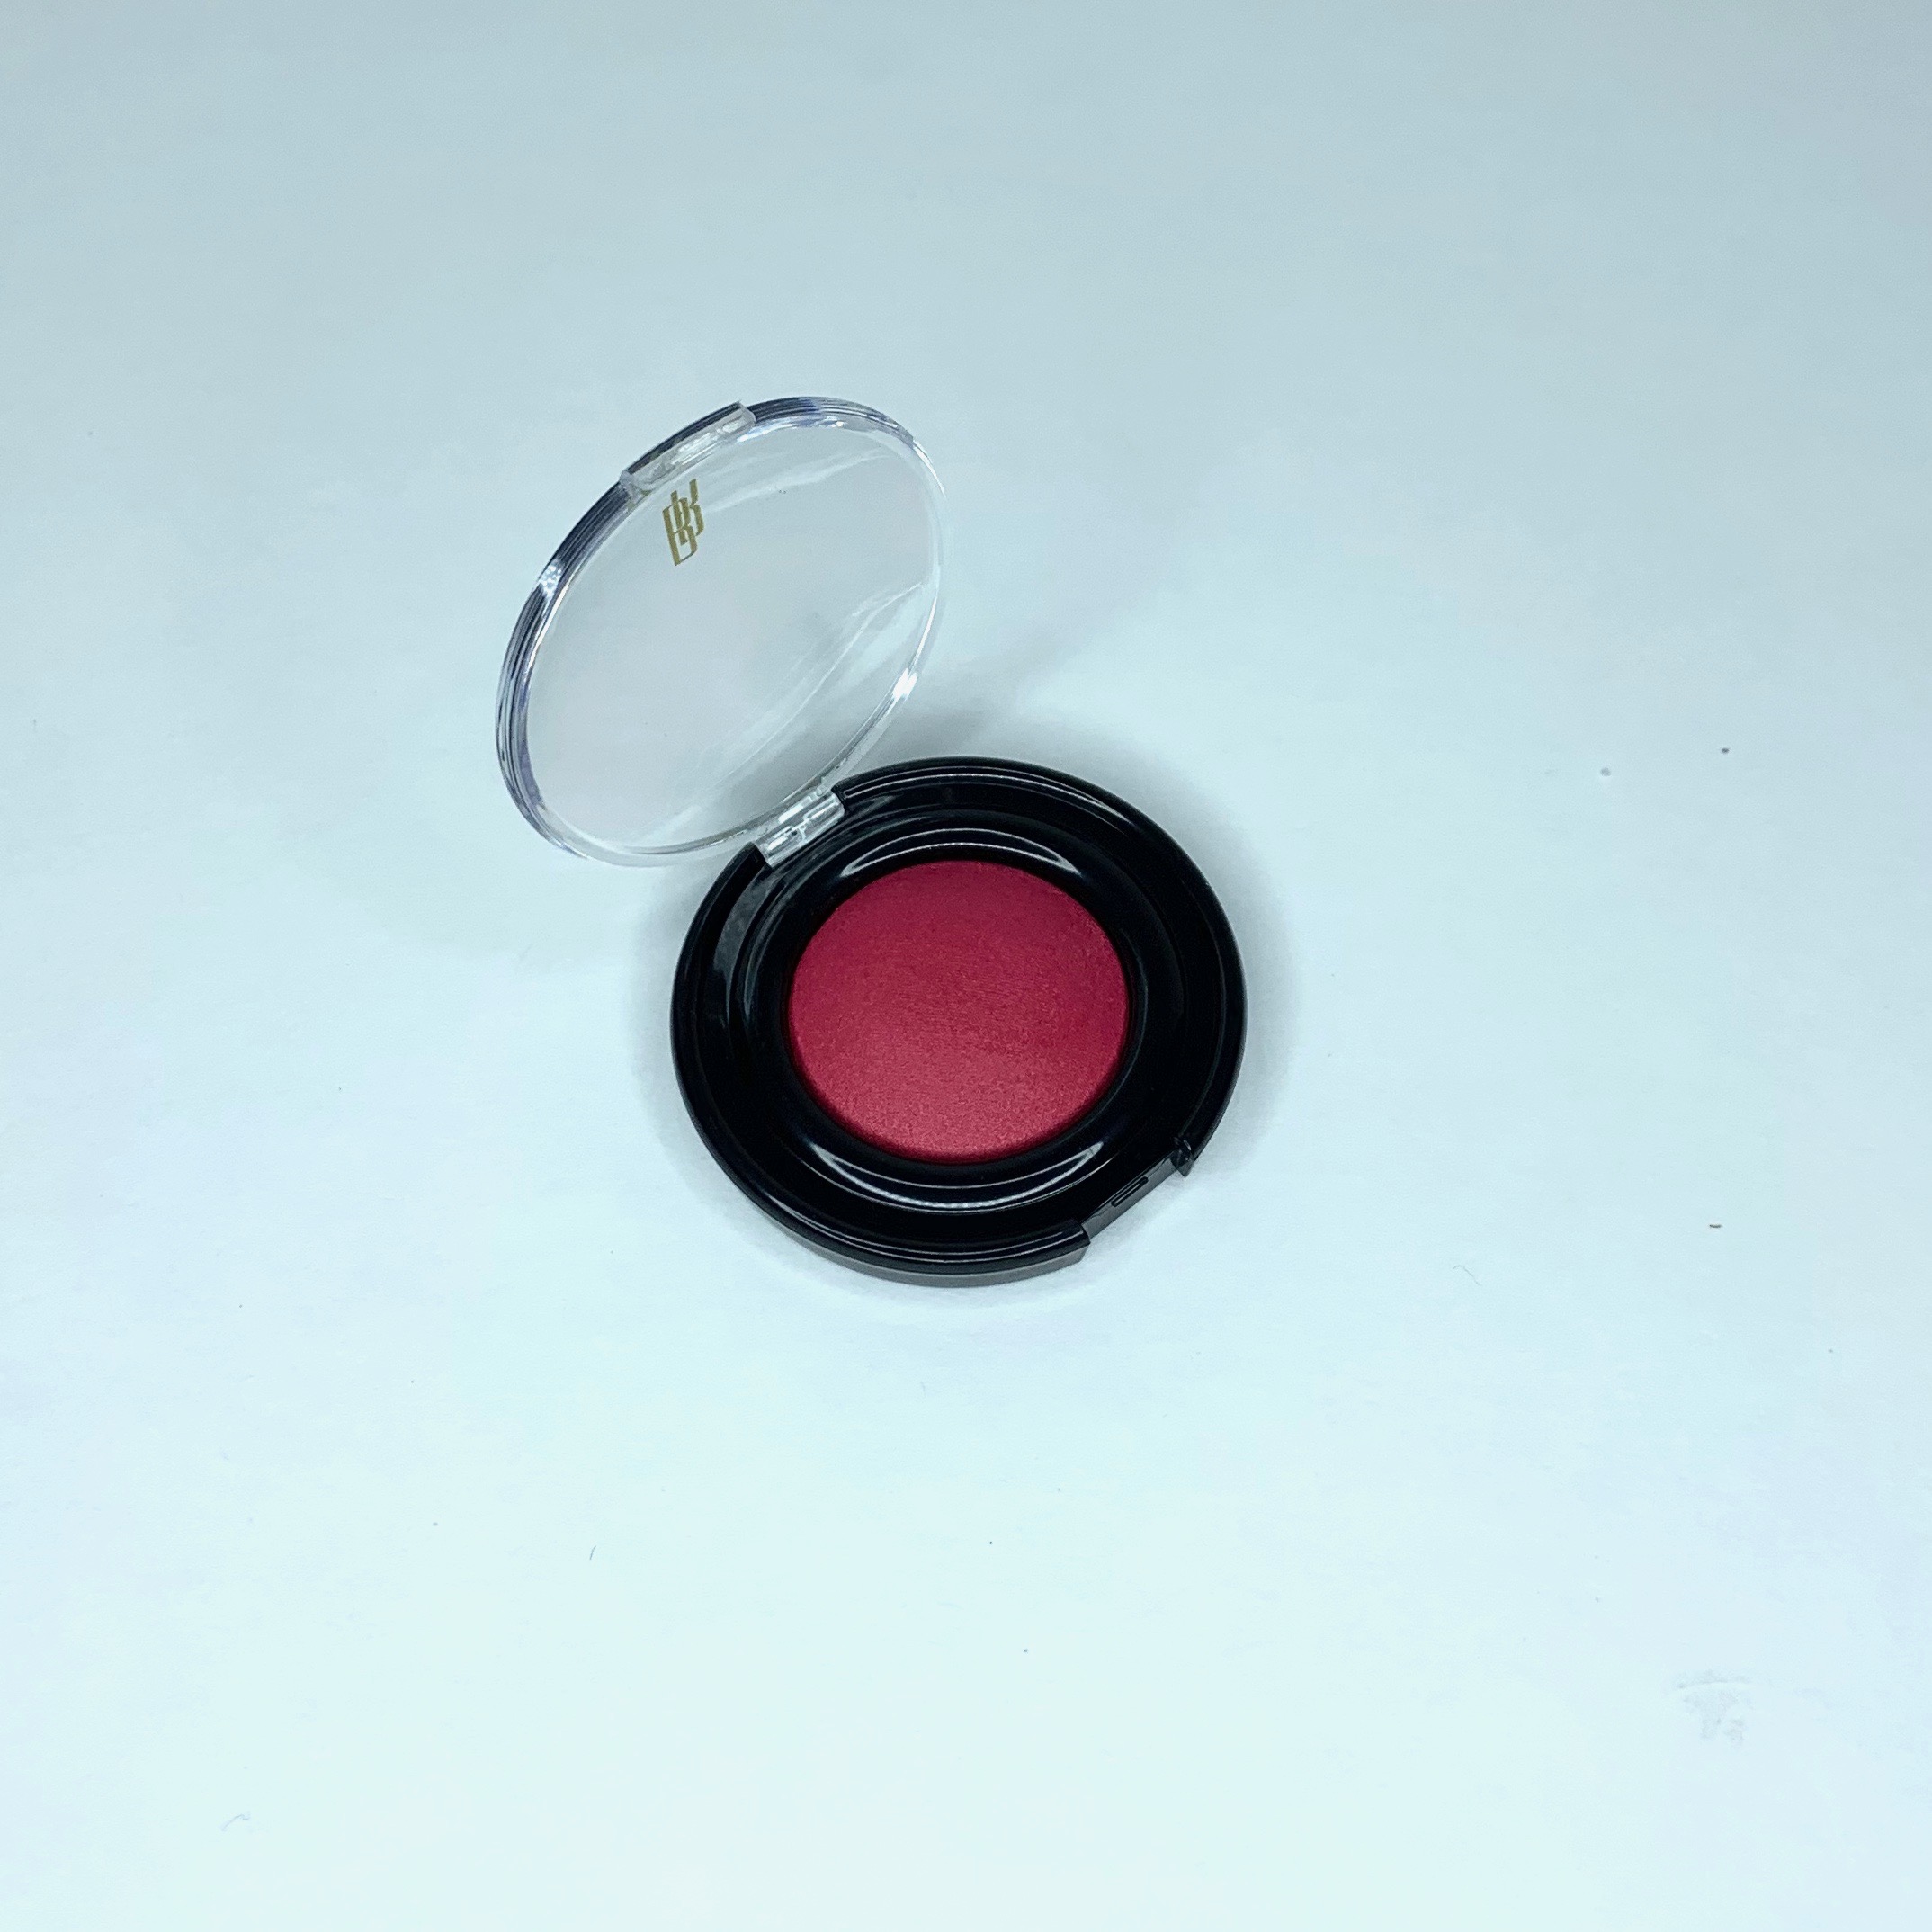 Artisan Color Baked Blush Open for Cocotique March 2020